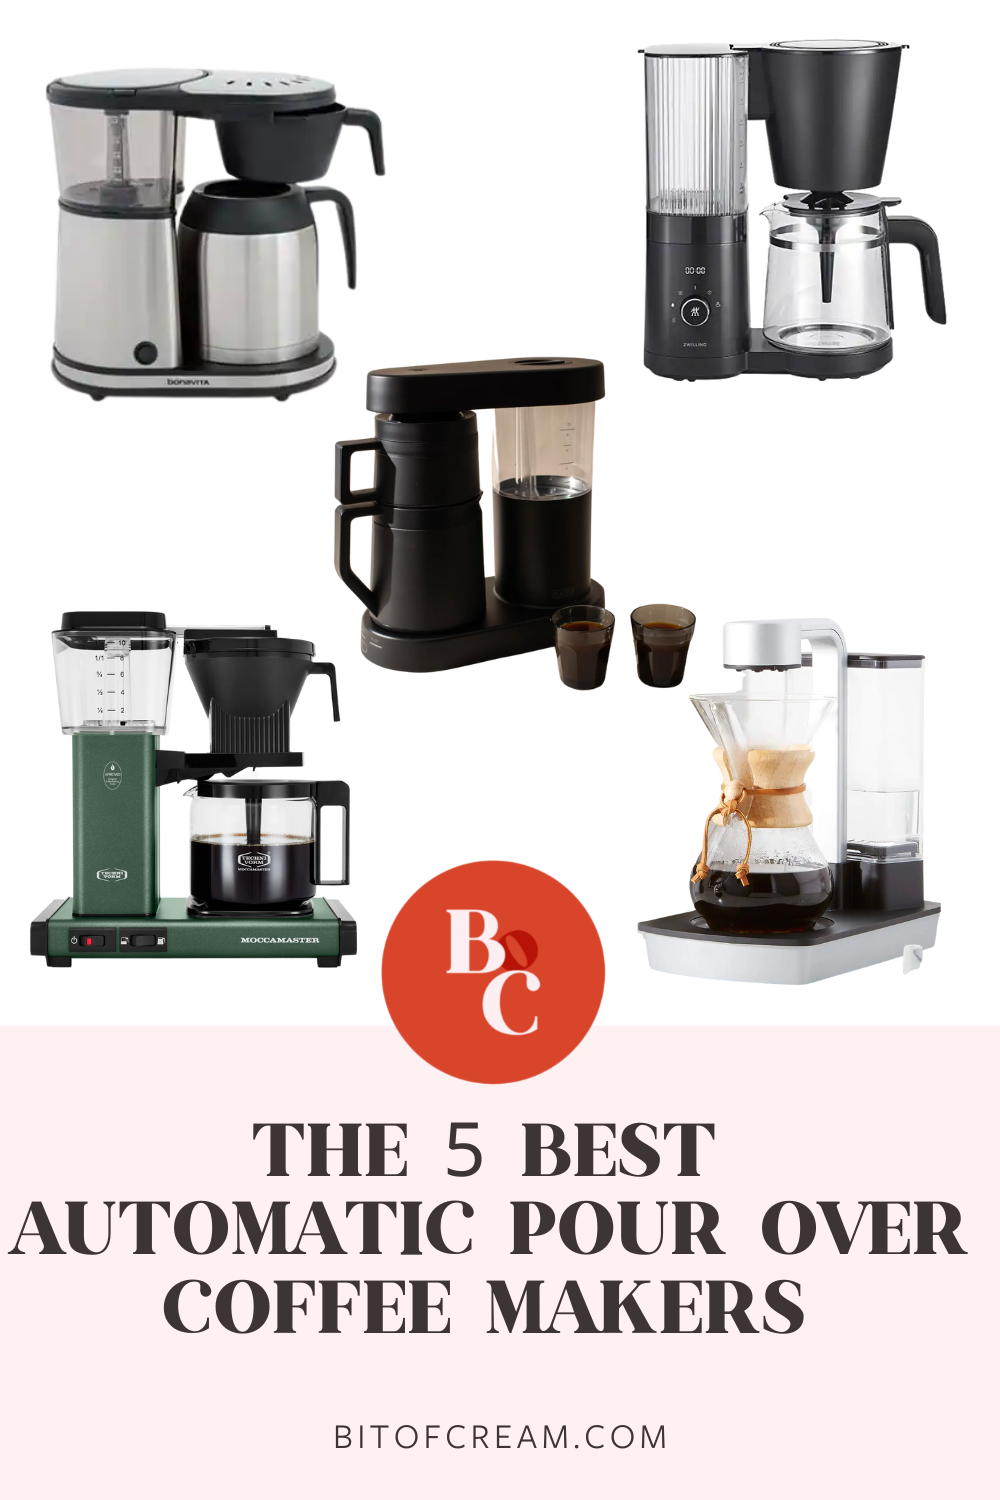 5 Best Automatic Pour Over Coffee Makers